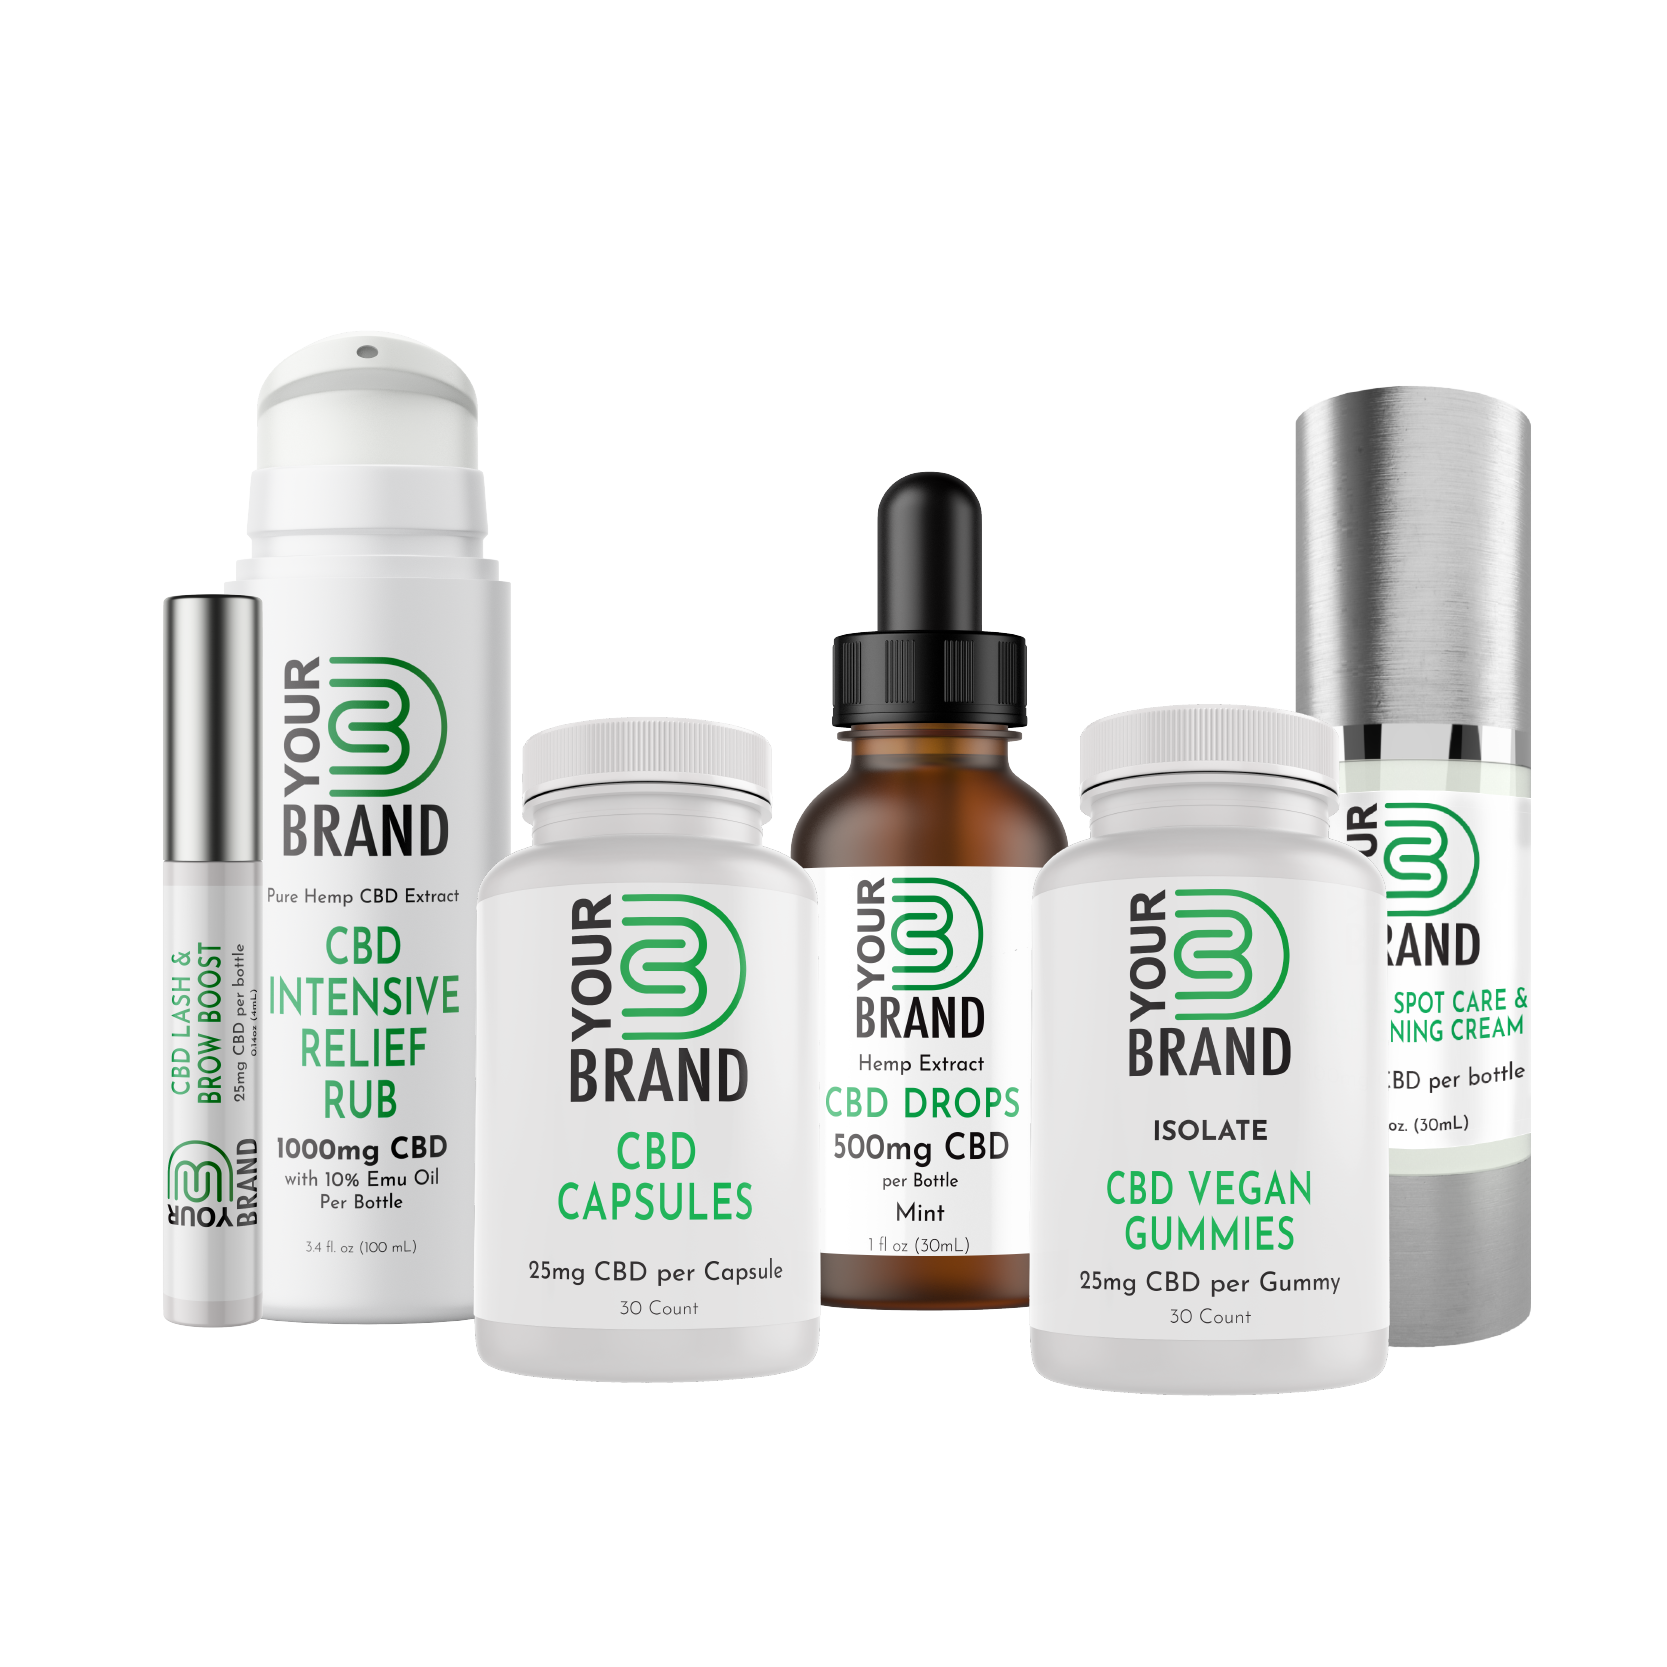 All CBD products